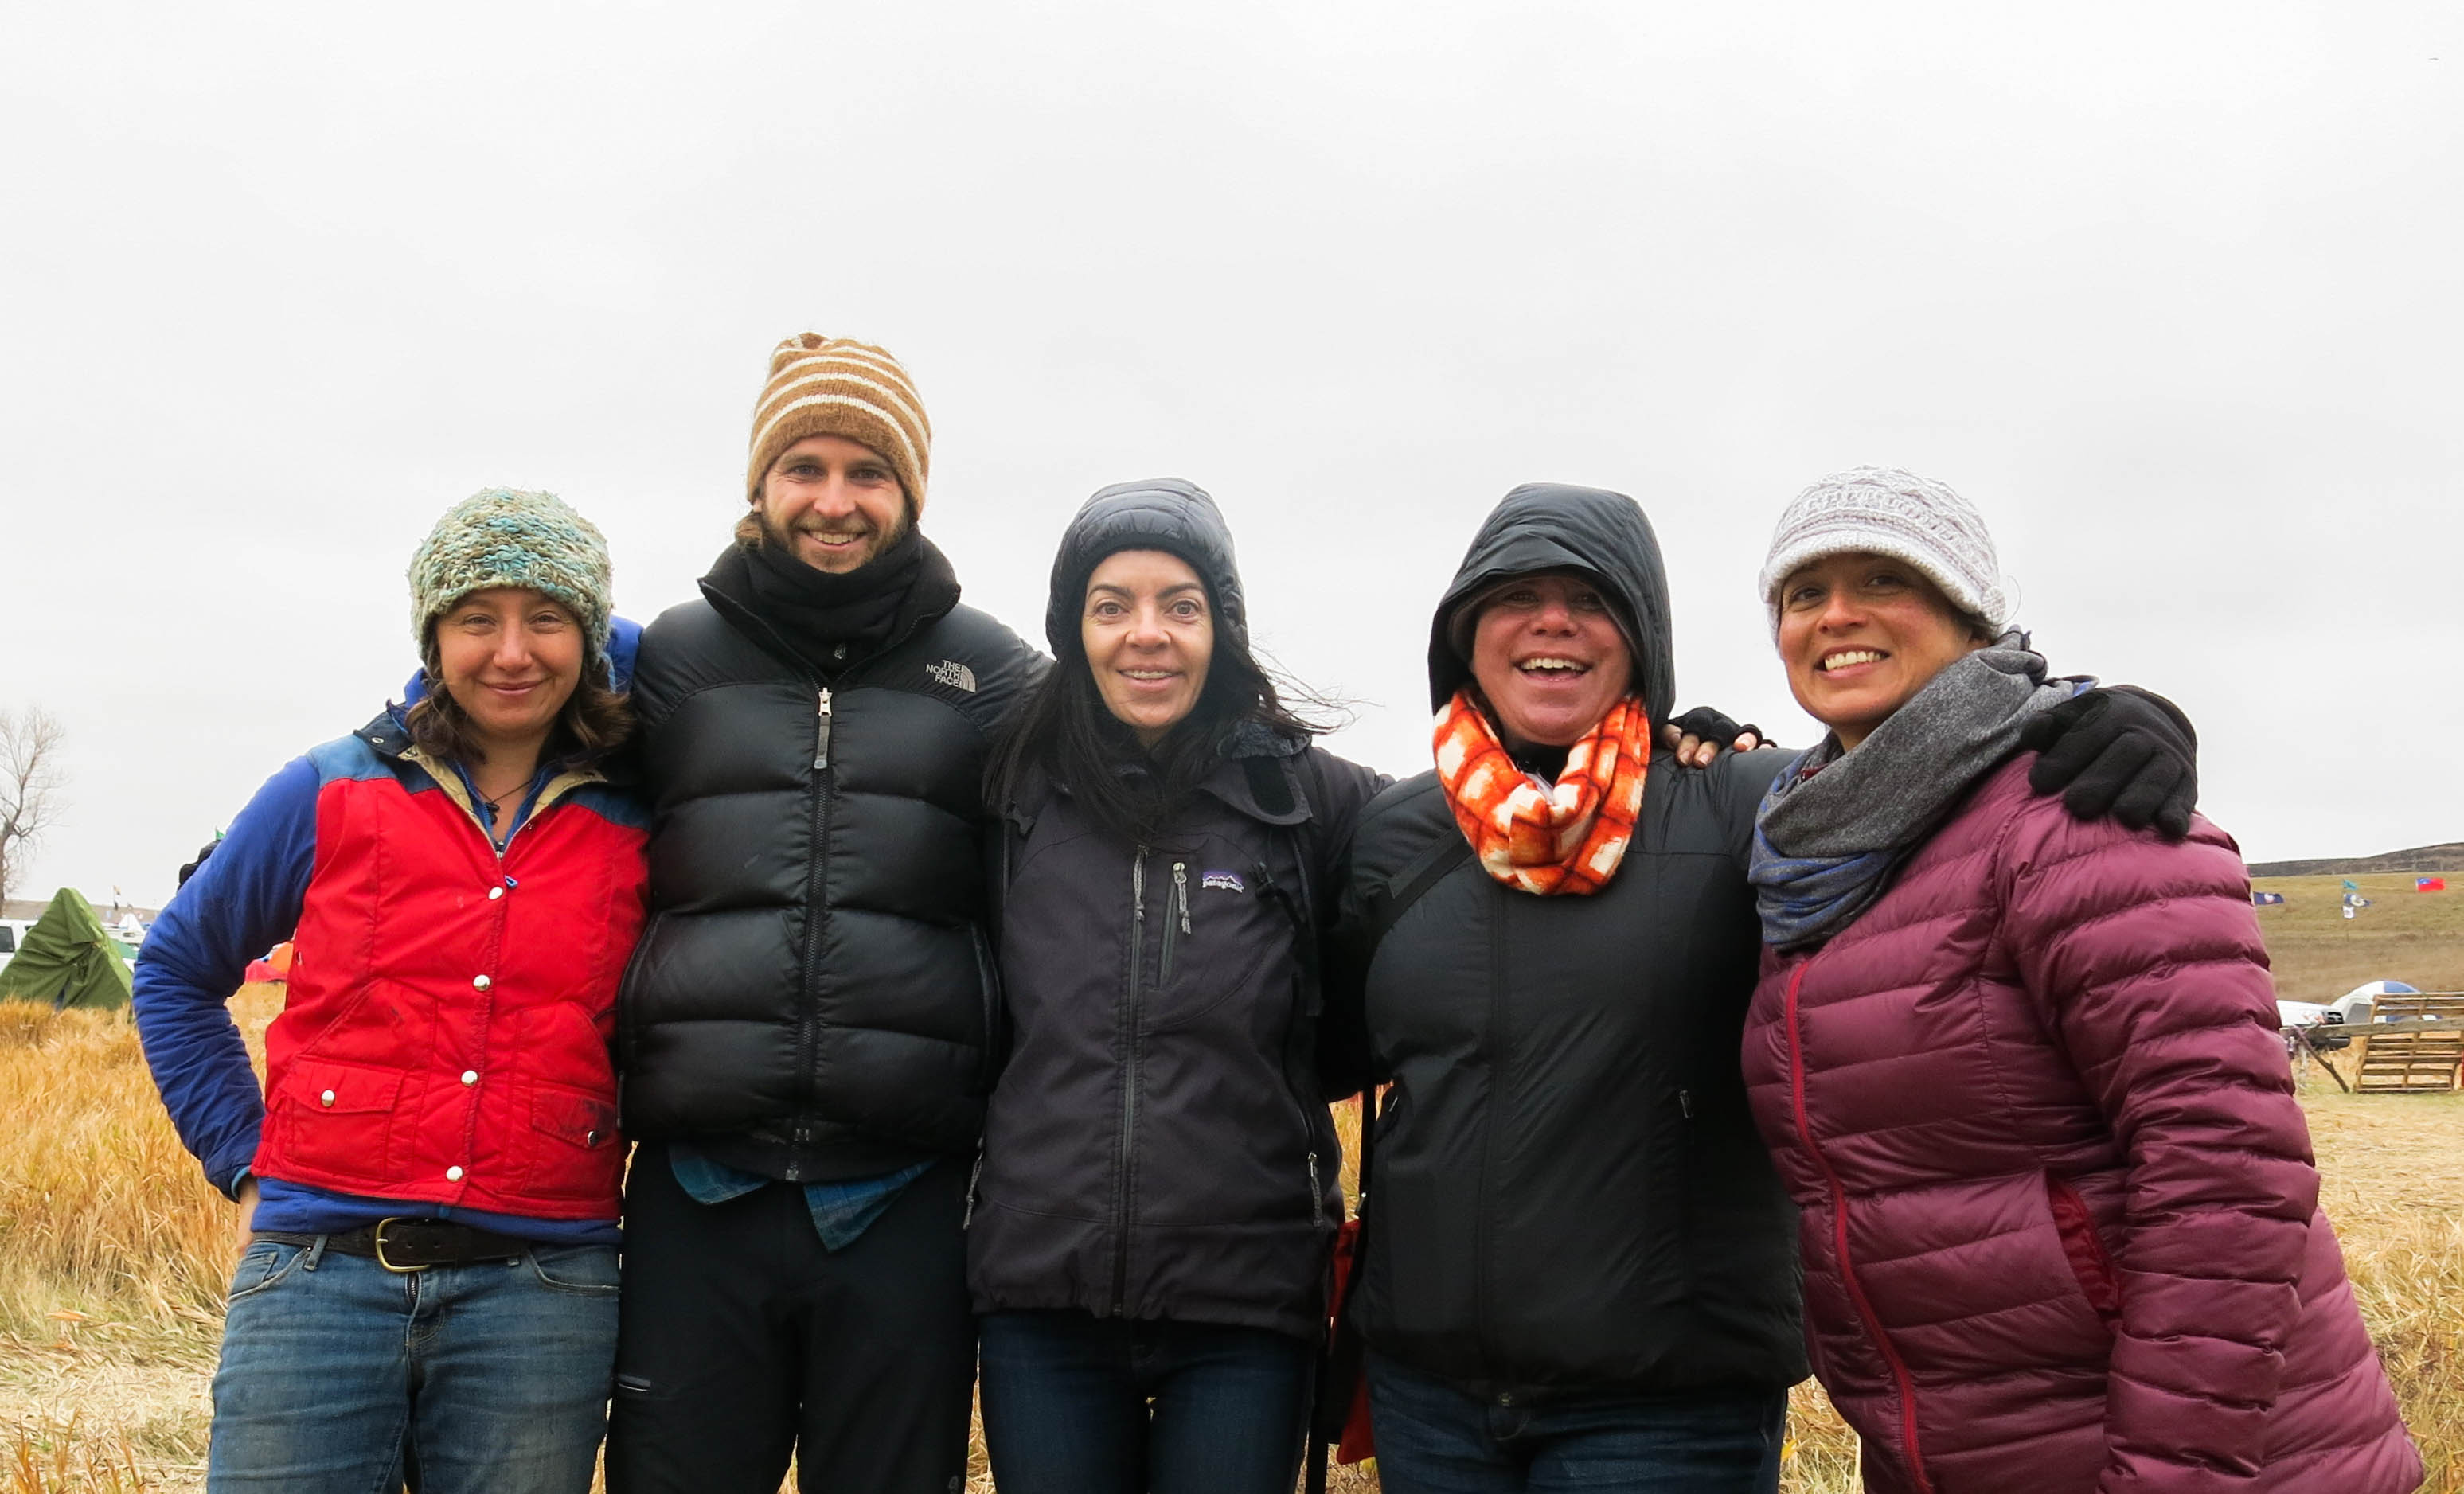 Bria's group visiting Standing Rock